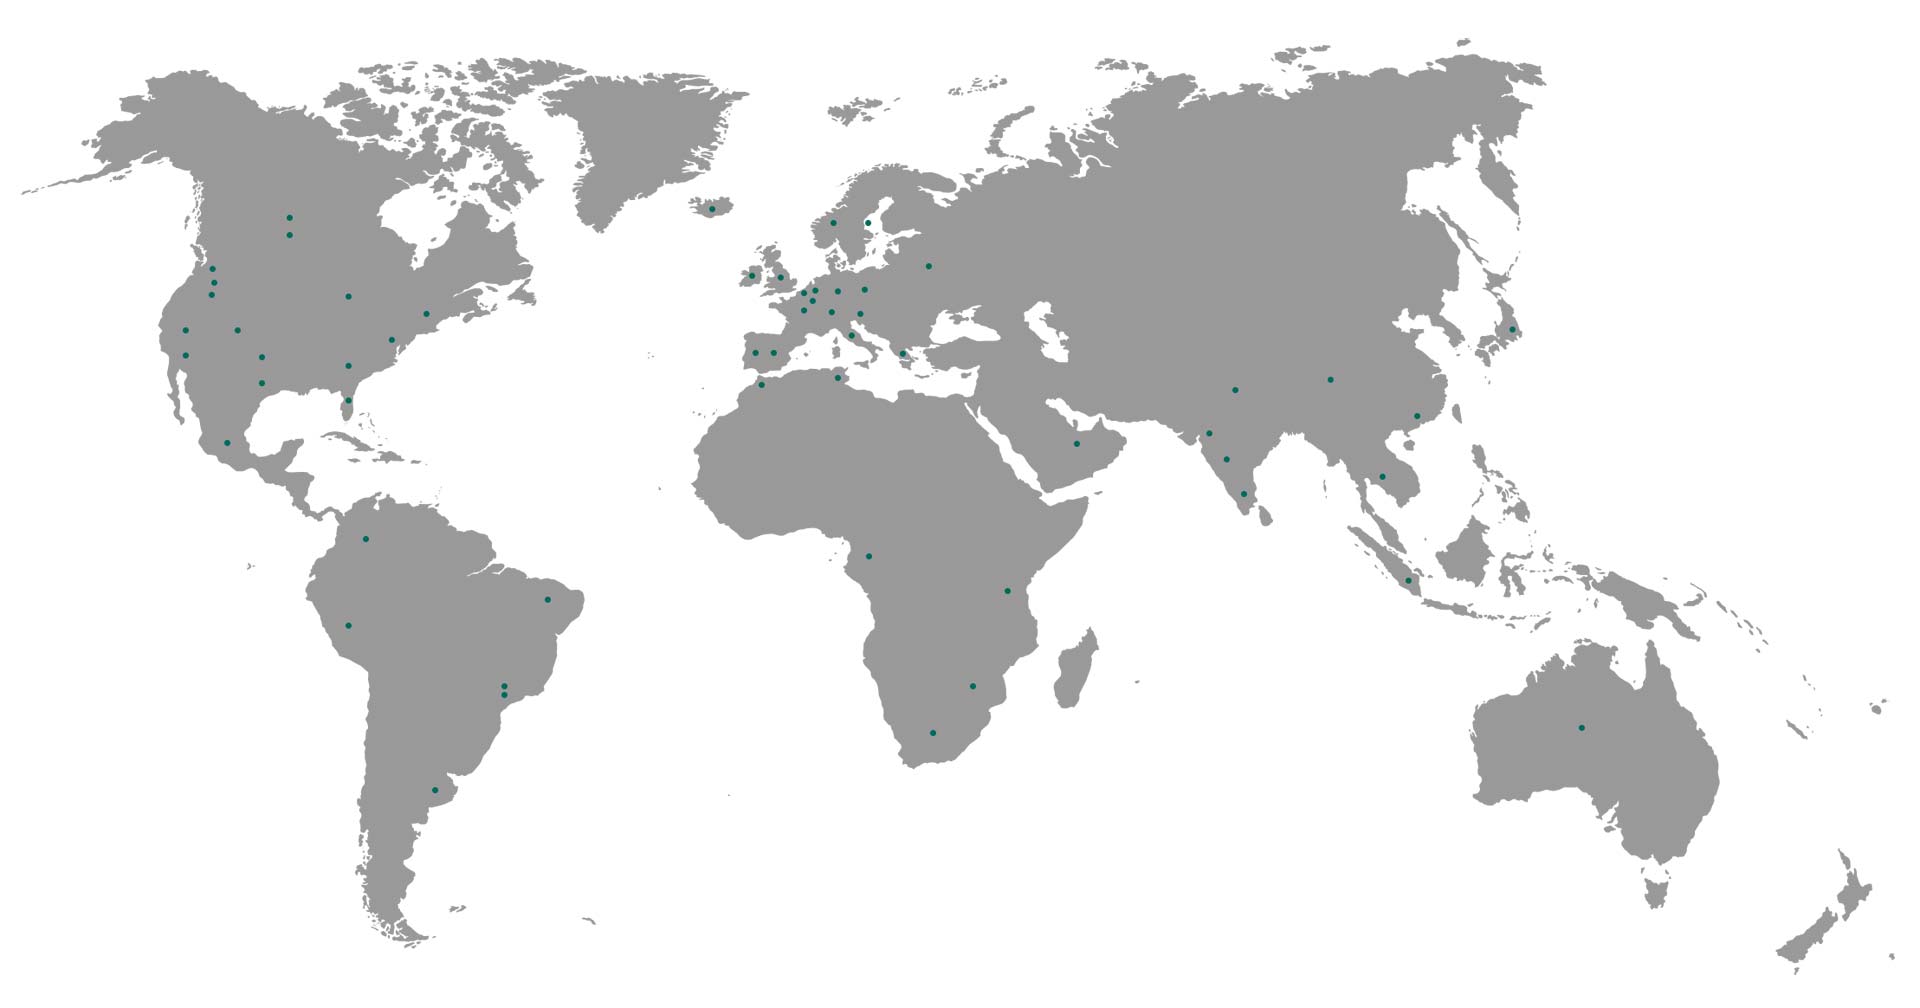 Ziegler is operating in many countries